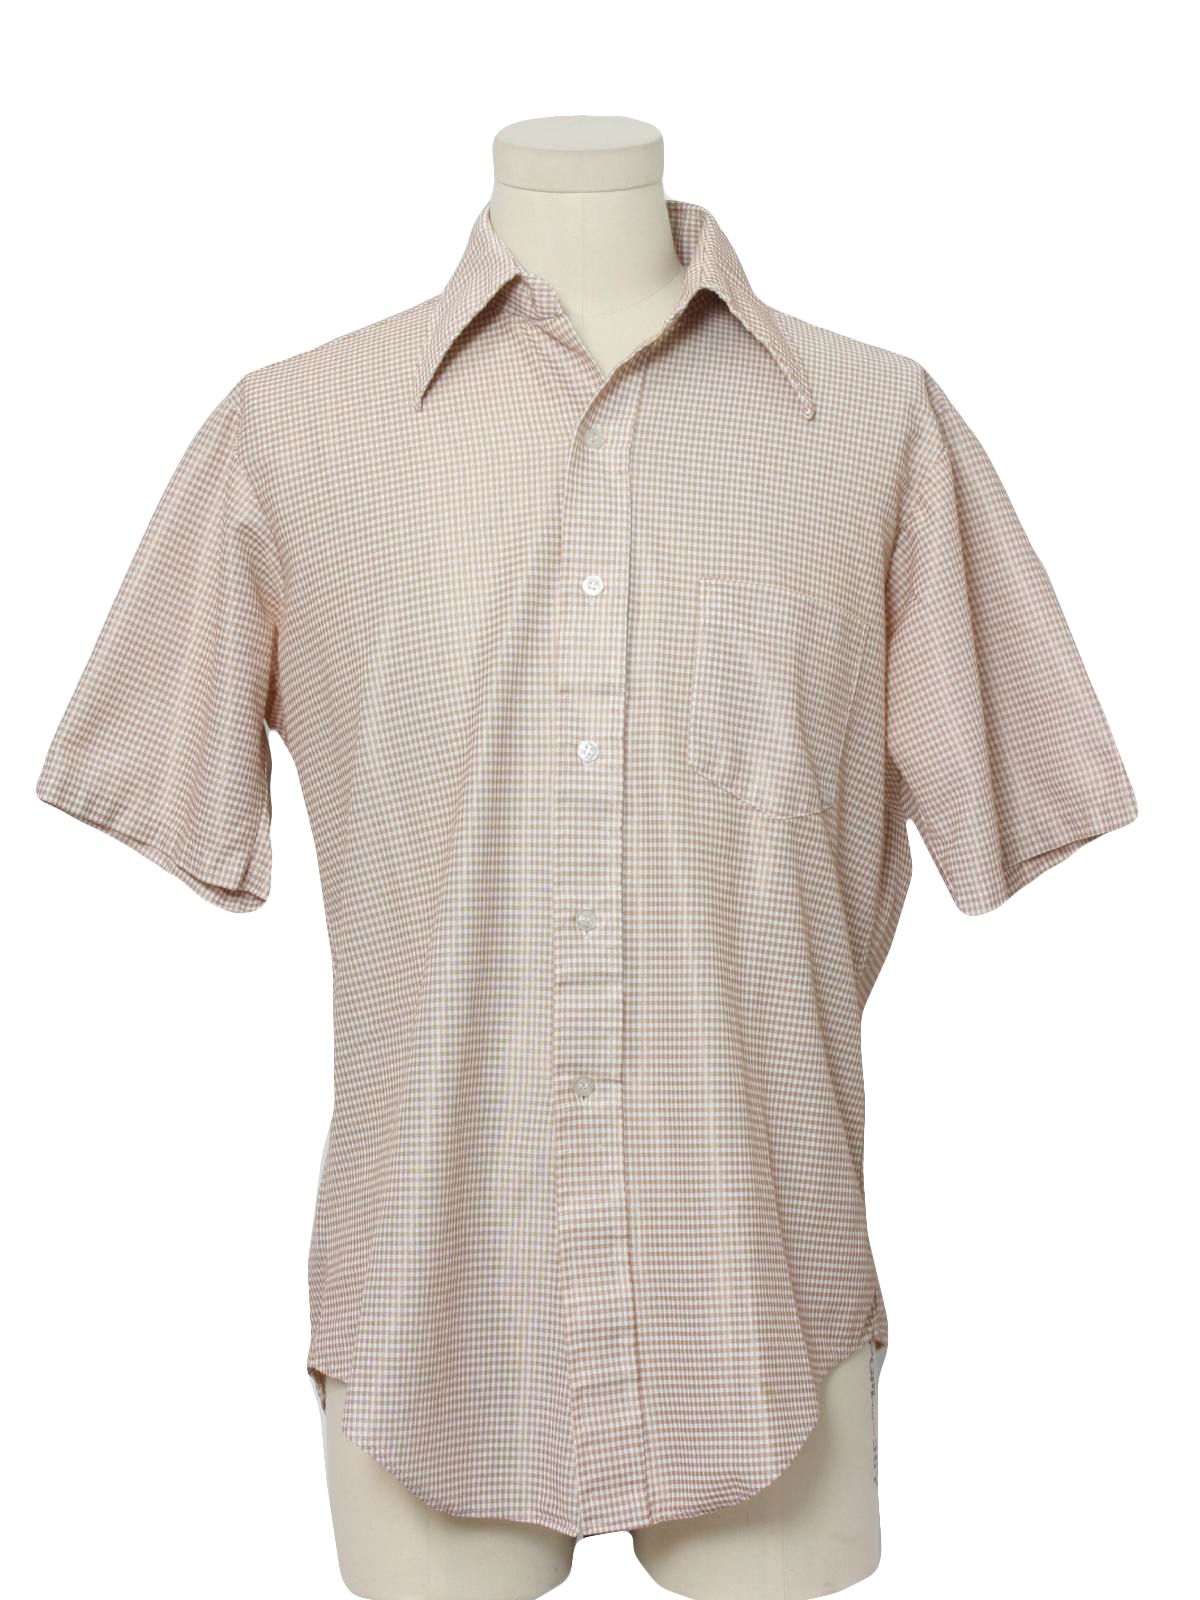 Seventies Towncraft, JC Penney Shirt: 70s -Towncraft, JC Penney- Mens ...